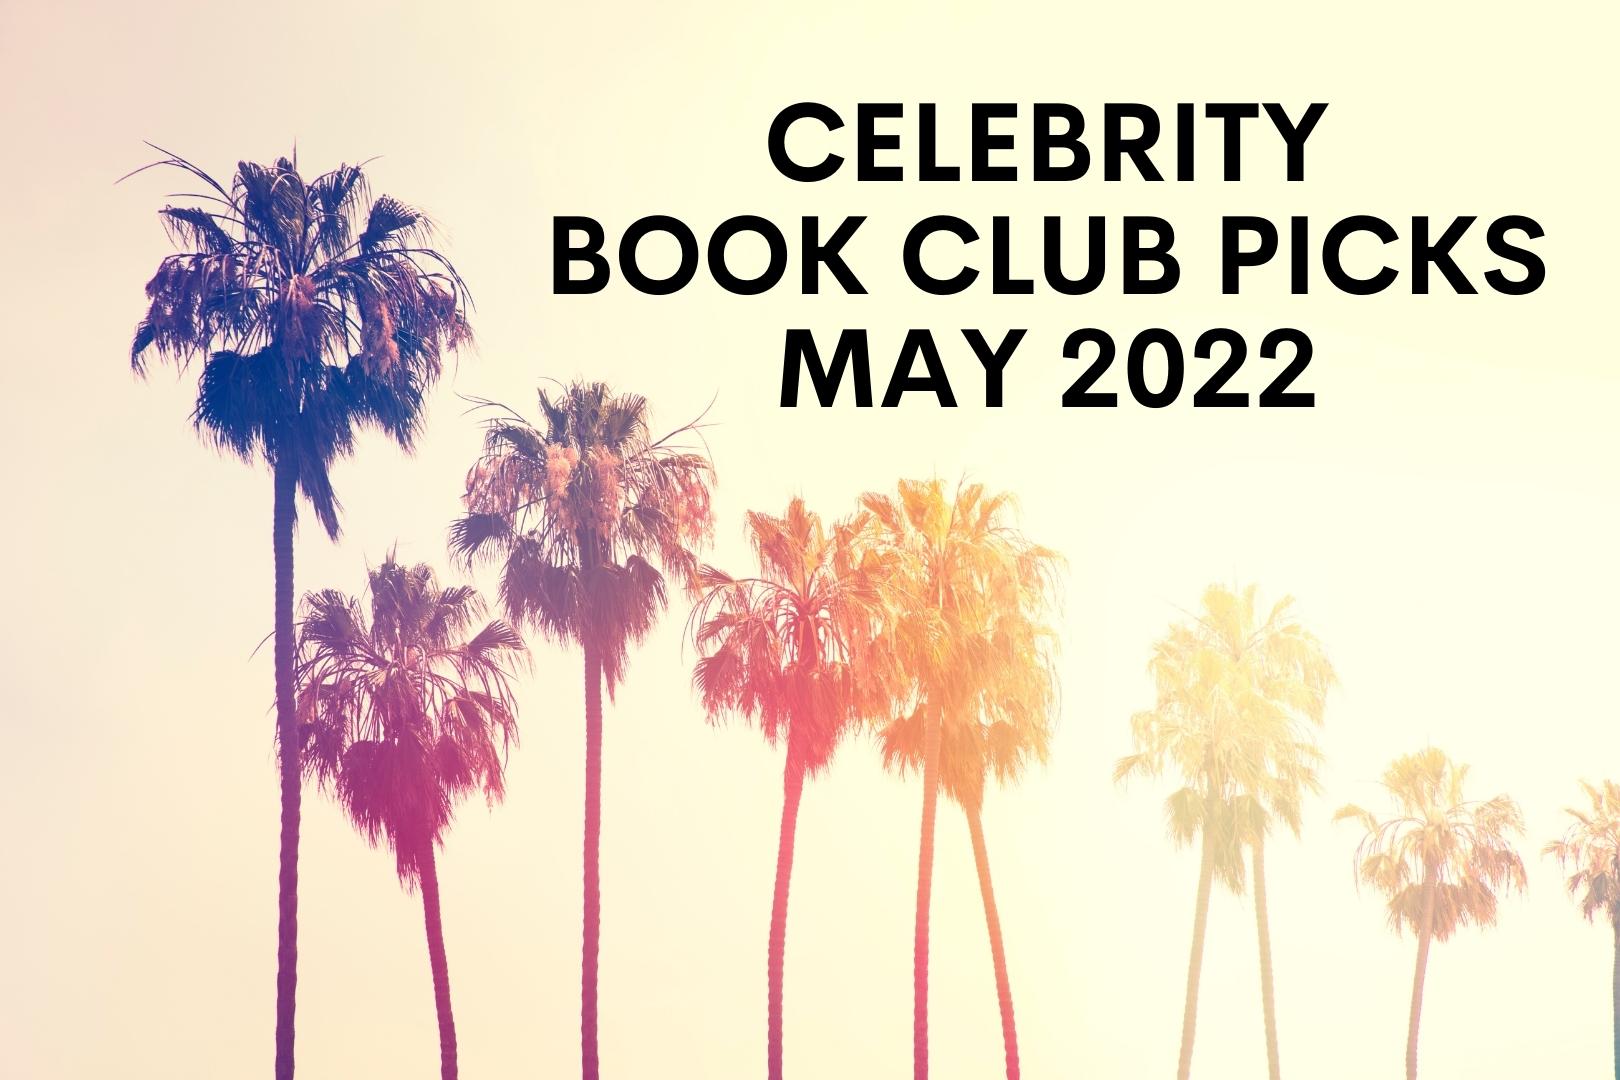 Celebrity Book Club Picks for May 2022